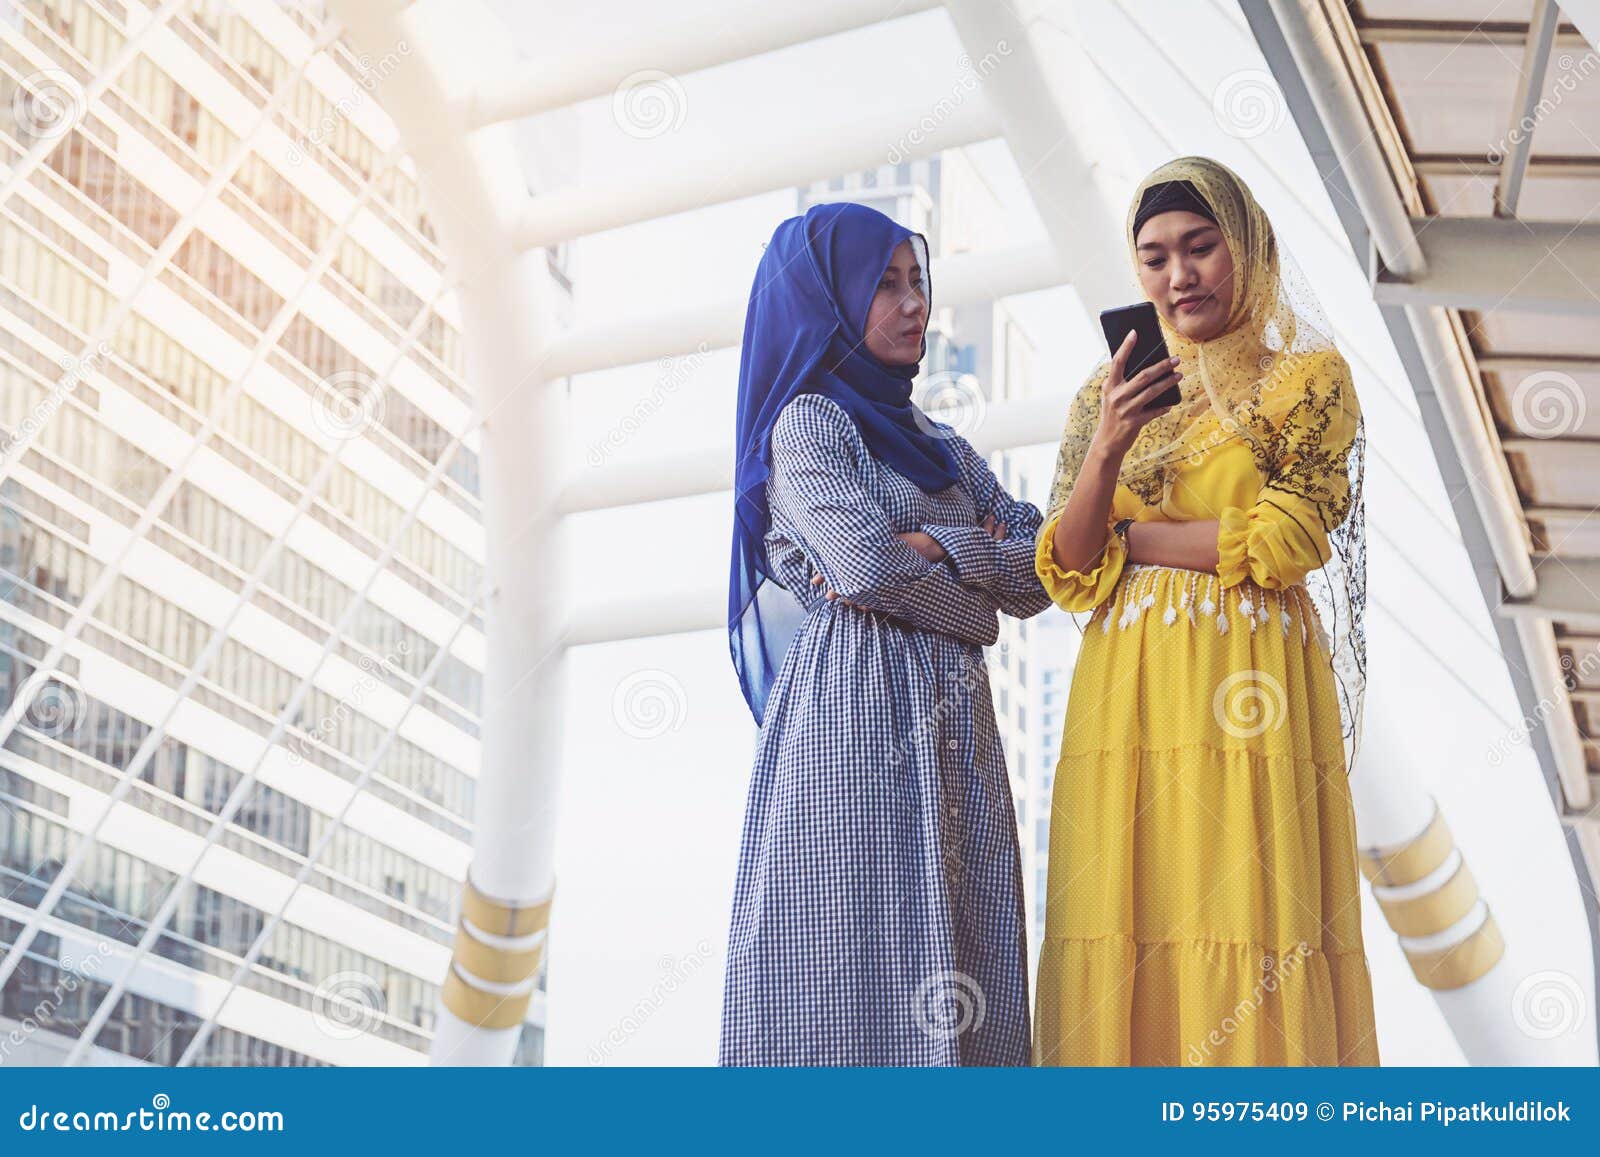 Muslim Women Messaging on a Mobile Phone in the City Stock Image ...